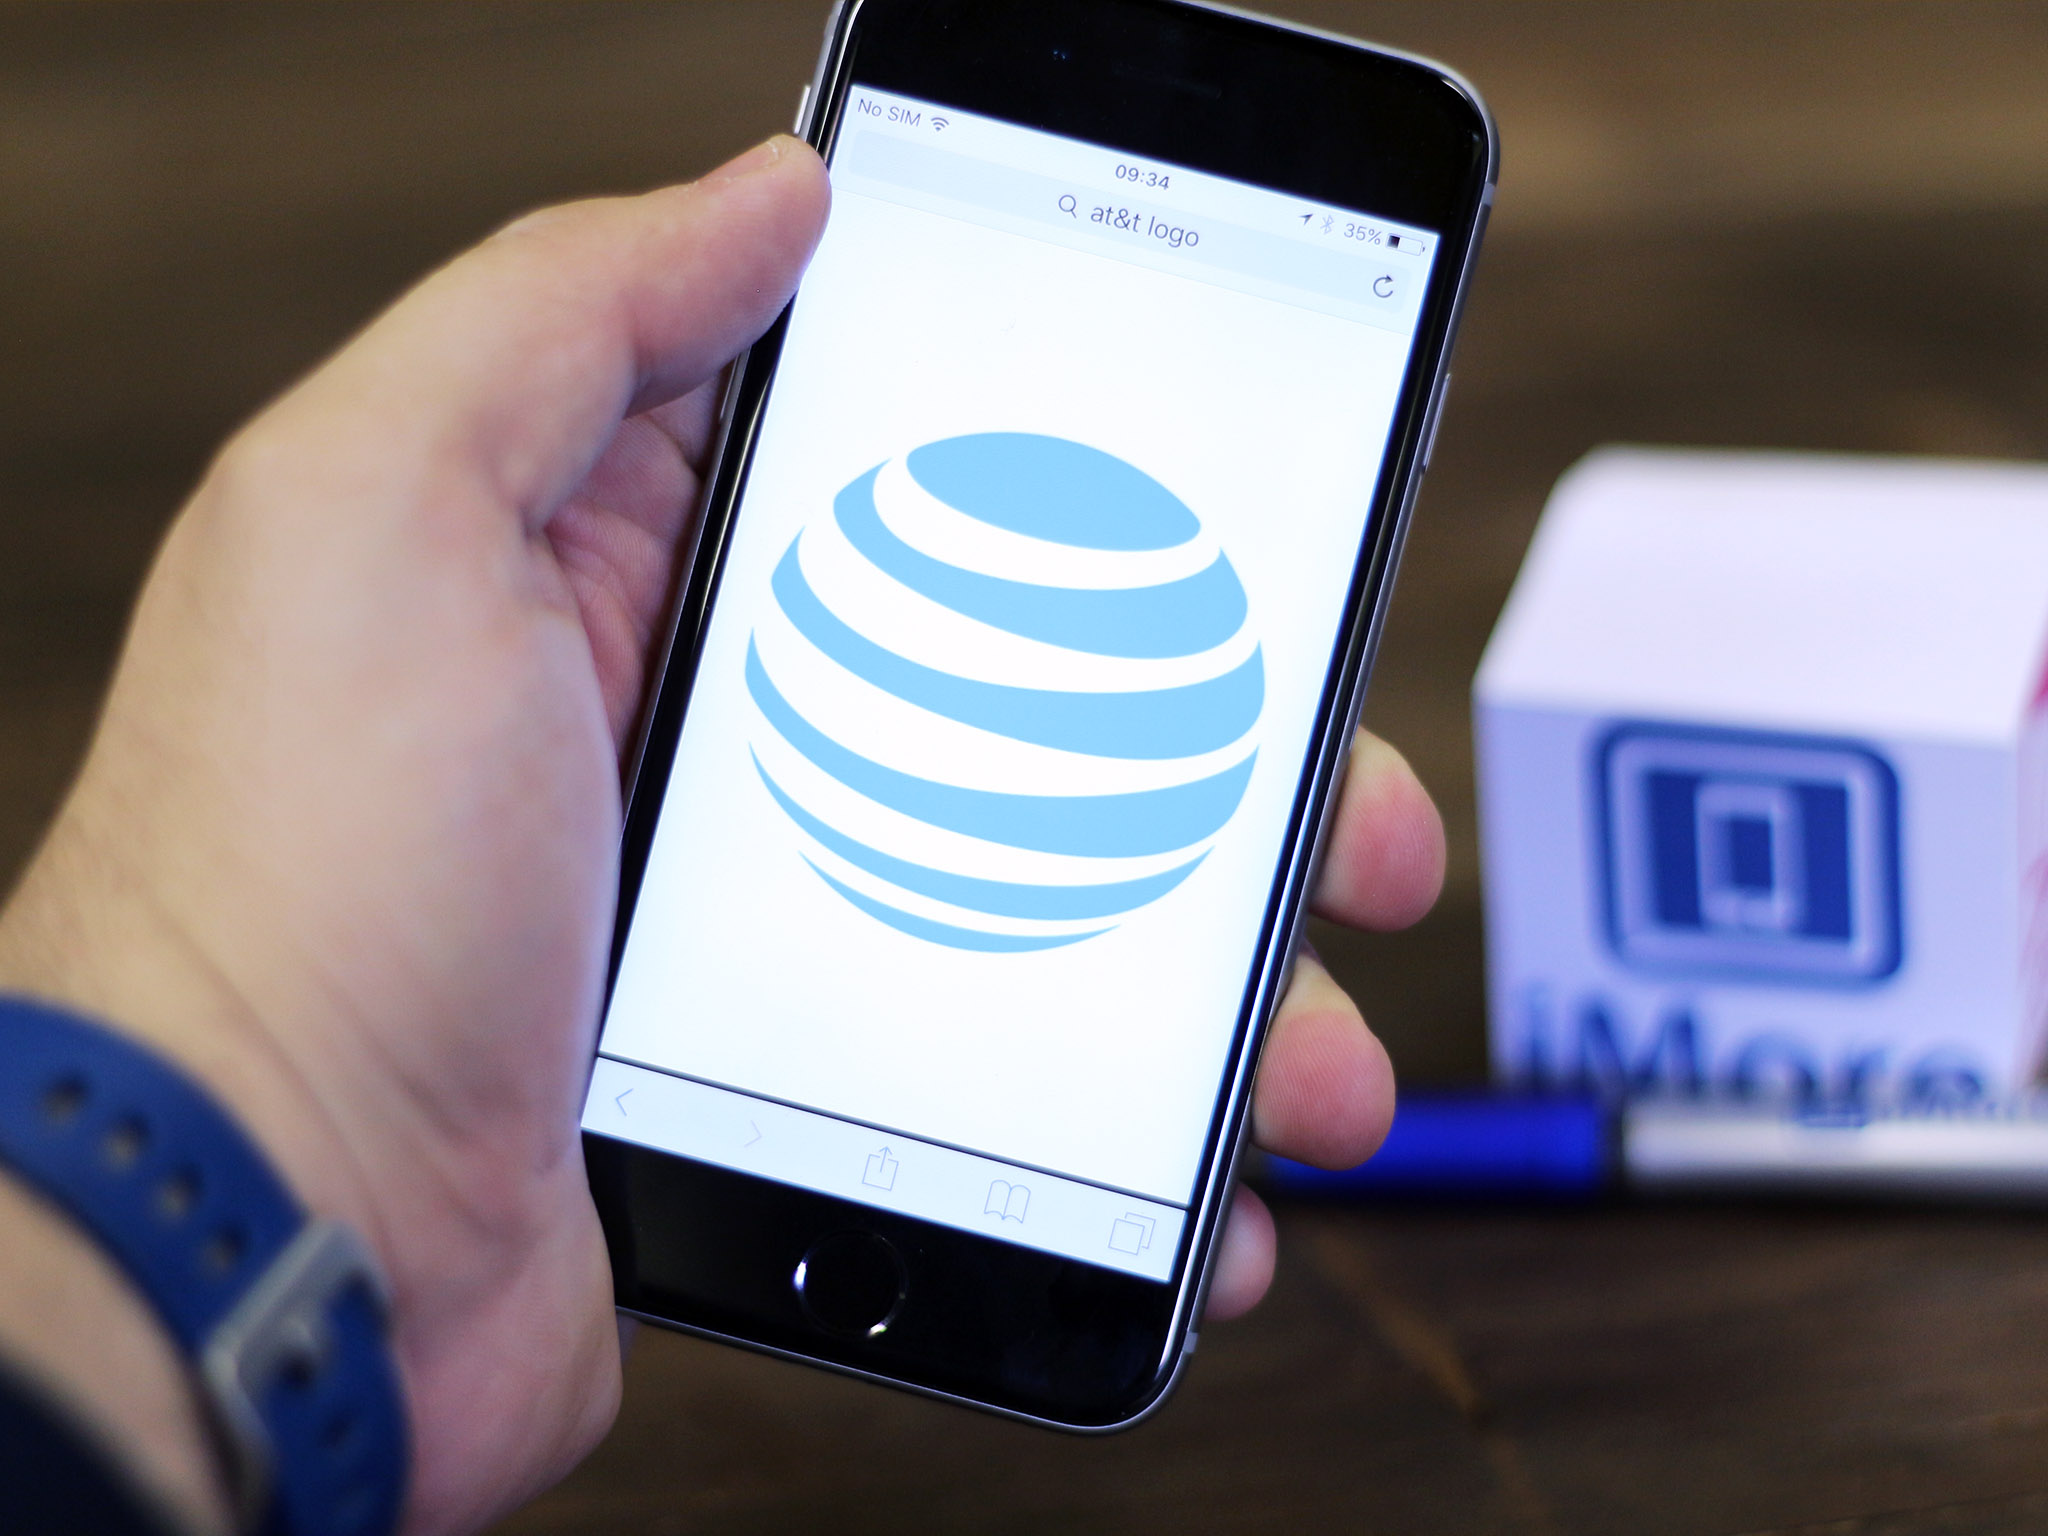 What are some ways an AT&T prepaid wireless customer can get free minutes?